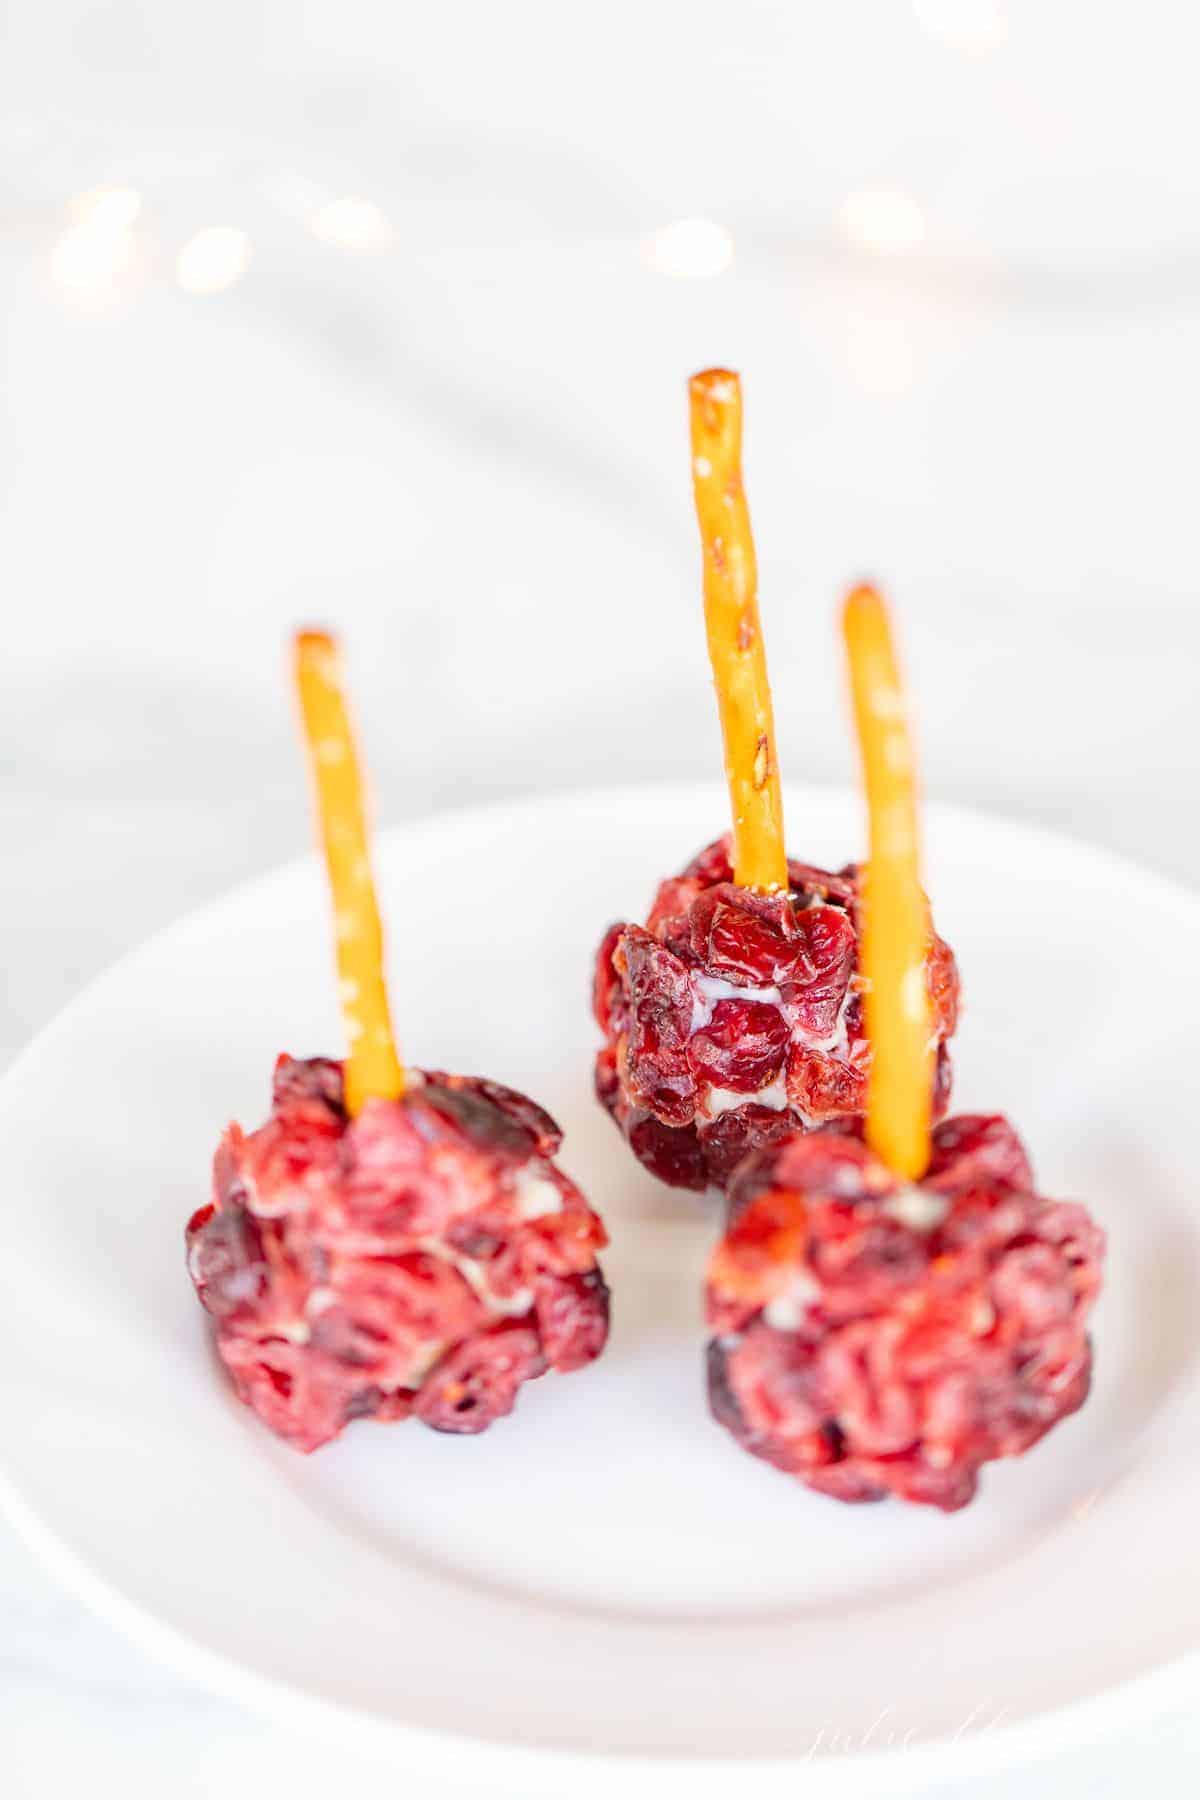 Individual cheeseball bites, covered in dried cranberries with pretzel sticks sticking out of each on a white plate.